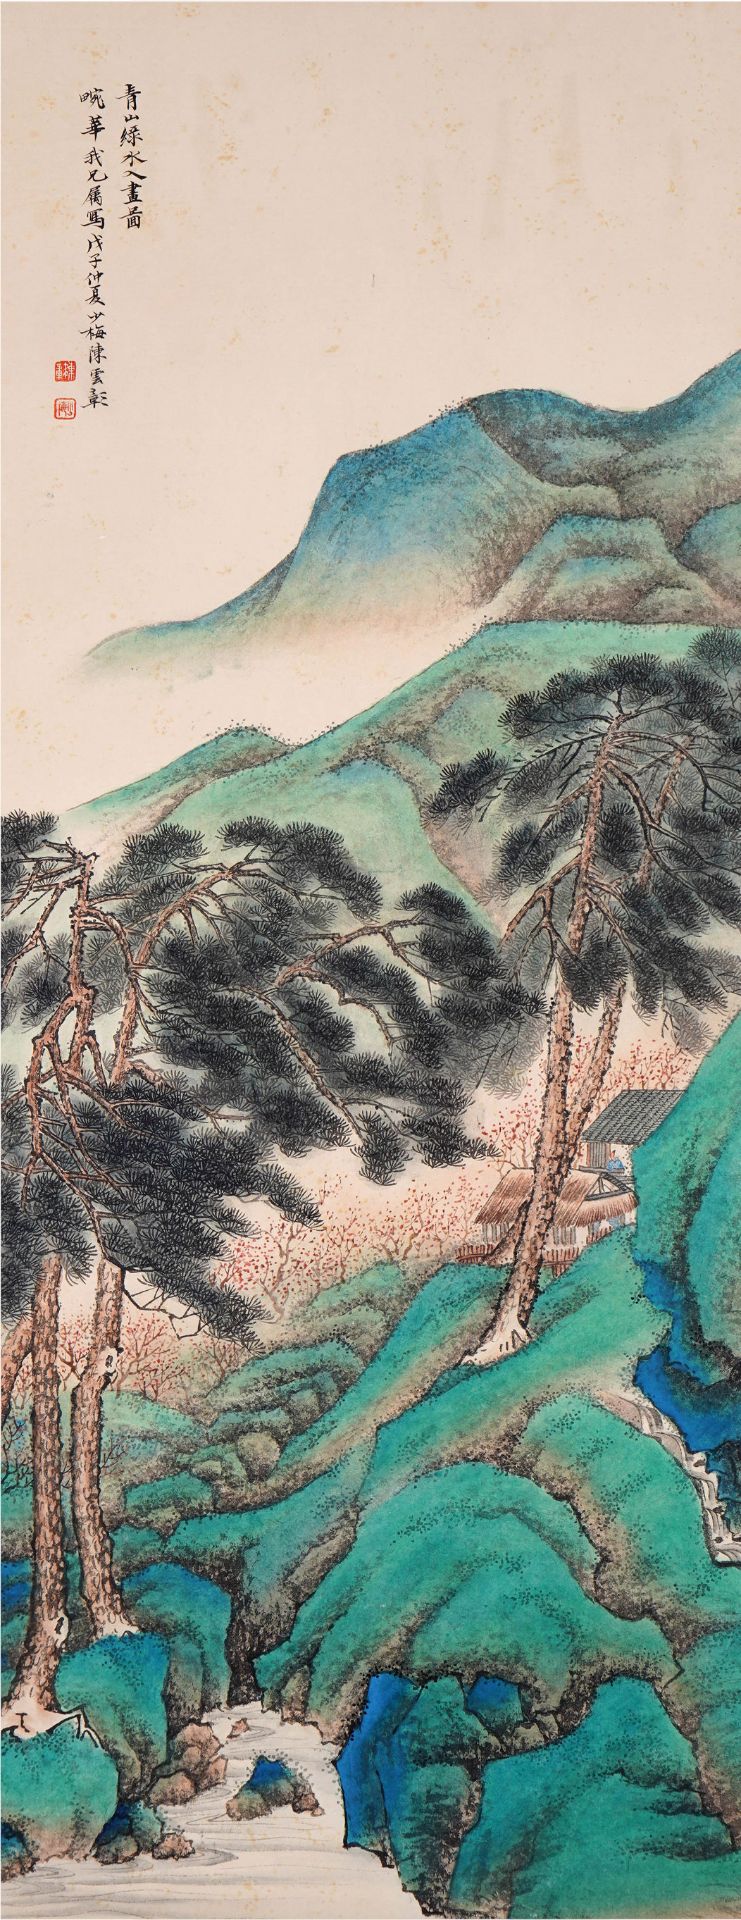 A Chinese Scroll Painting by Chen Shaomei - Image 2 of 10